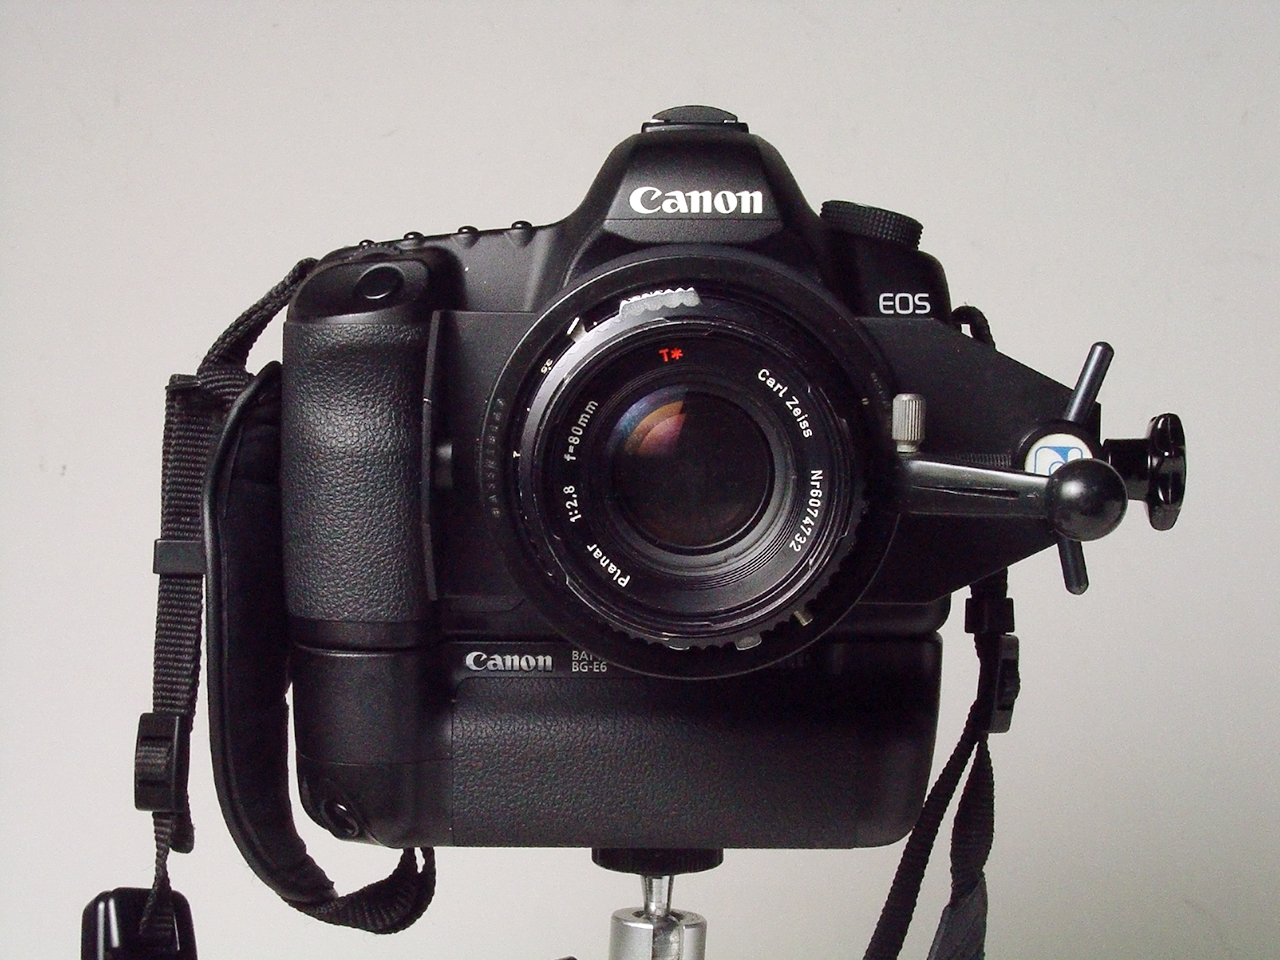 Click to Enlarge - Canon EOS 5D Mark II with Zrk Panorama Shift Adapter and Zeiss 1:2.8 f=80mm Planar (Hasselblad 500C/M 